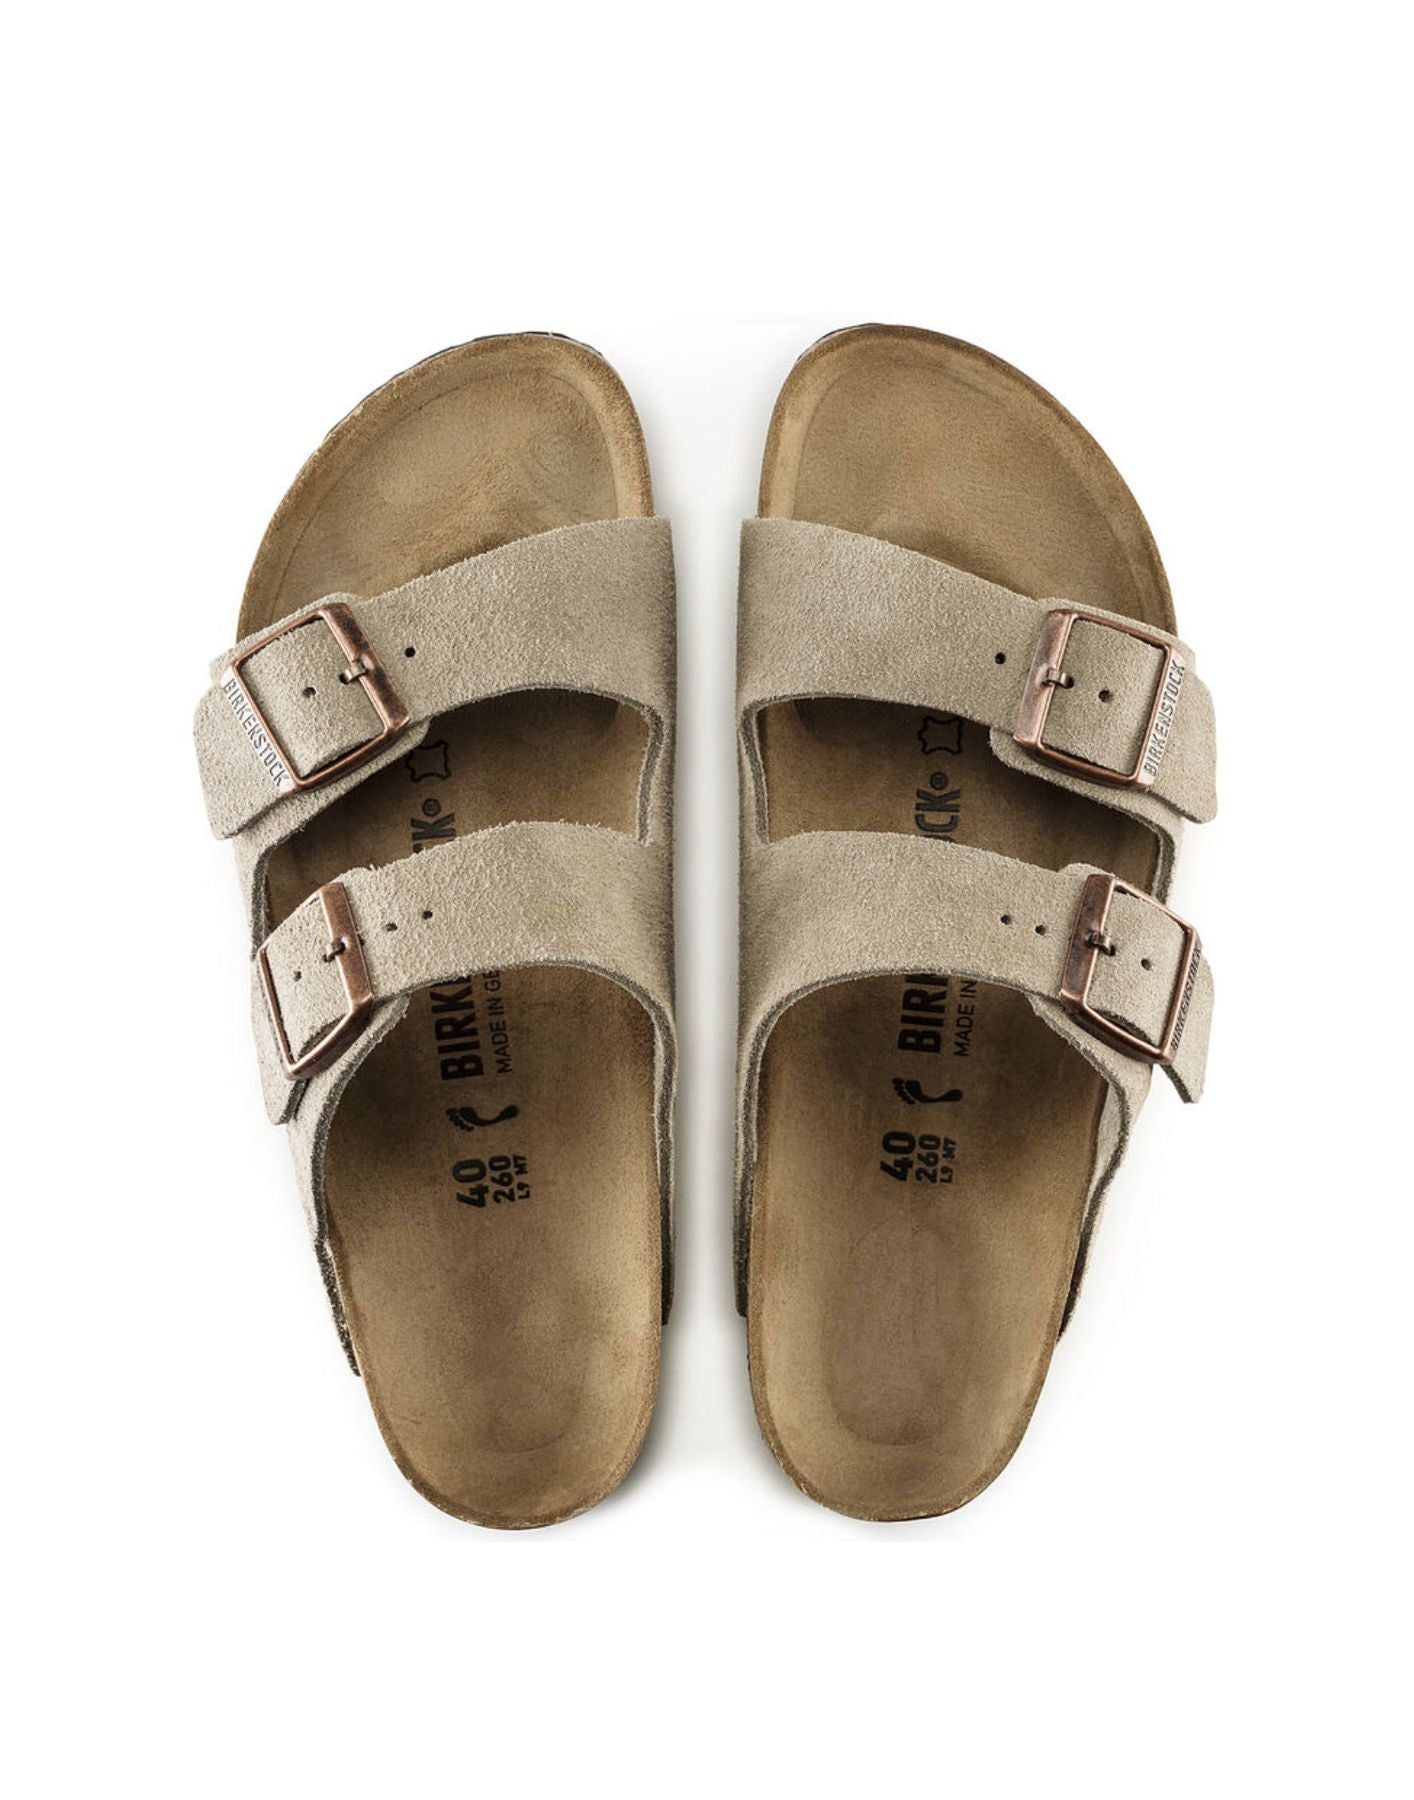 Sandal for woman 0051463 W TAUPE BIRKENSTOCK